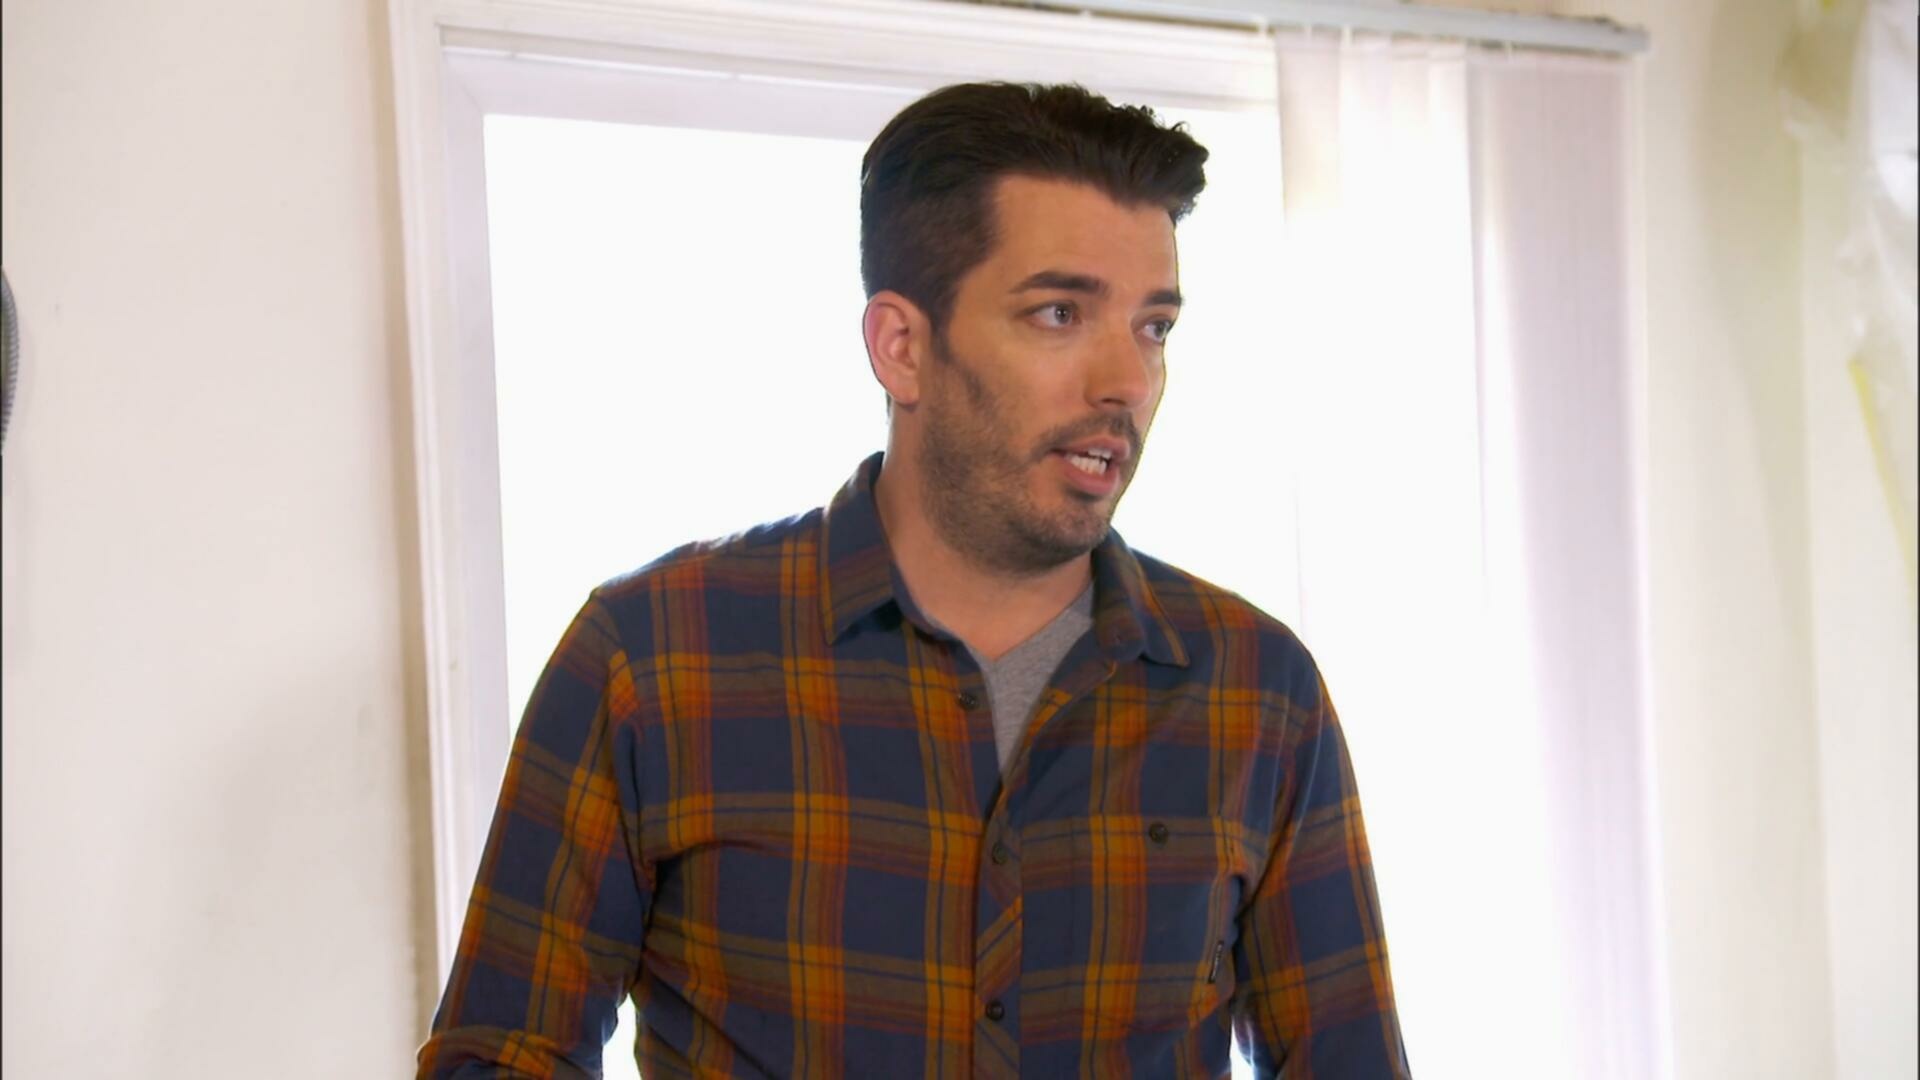 Property Brothers S10E02 Searching for Glitz and Glam Dorothy And John 1080p MAX WEB DL DDP2 0 H 264